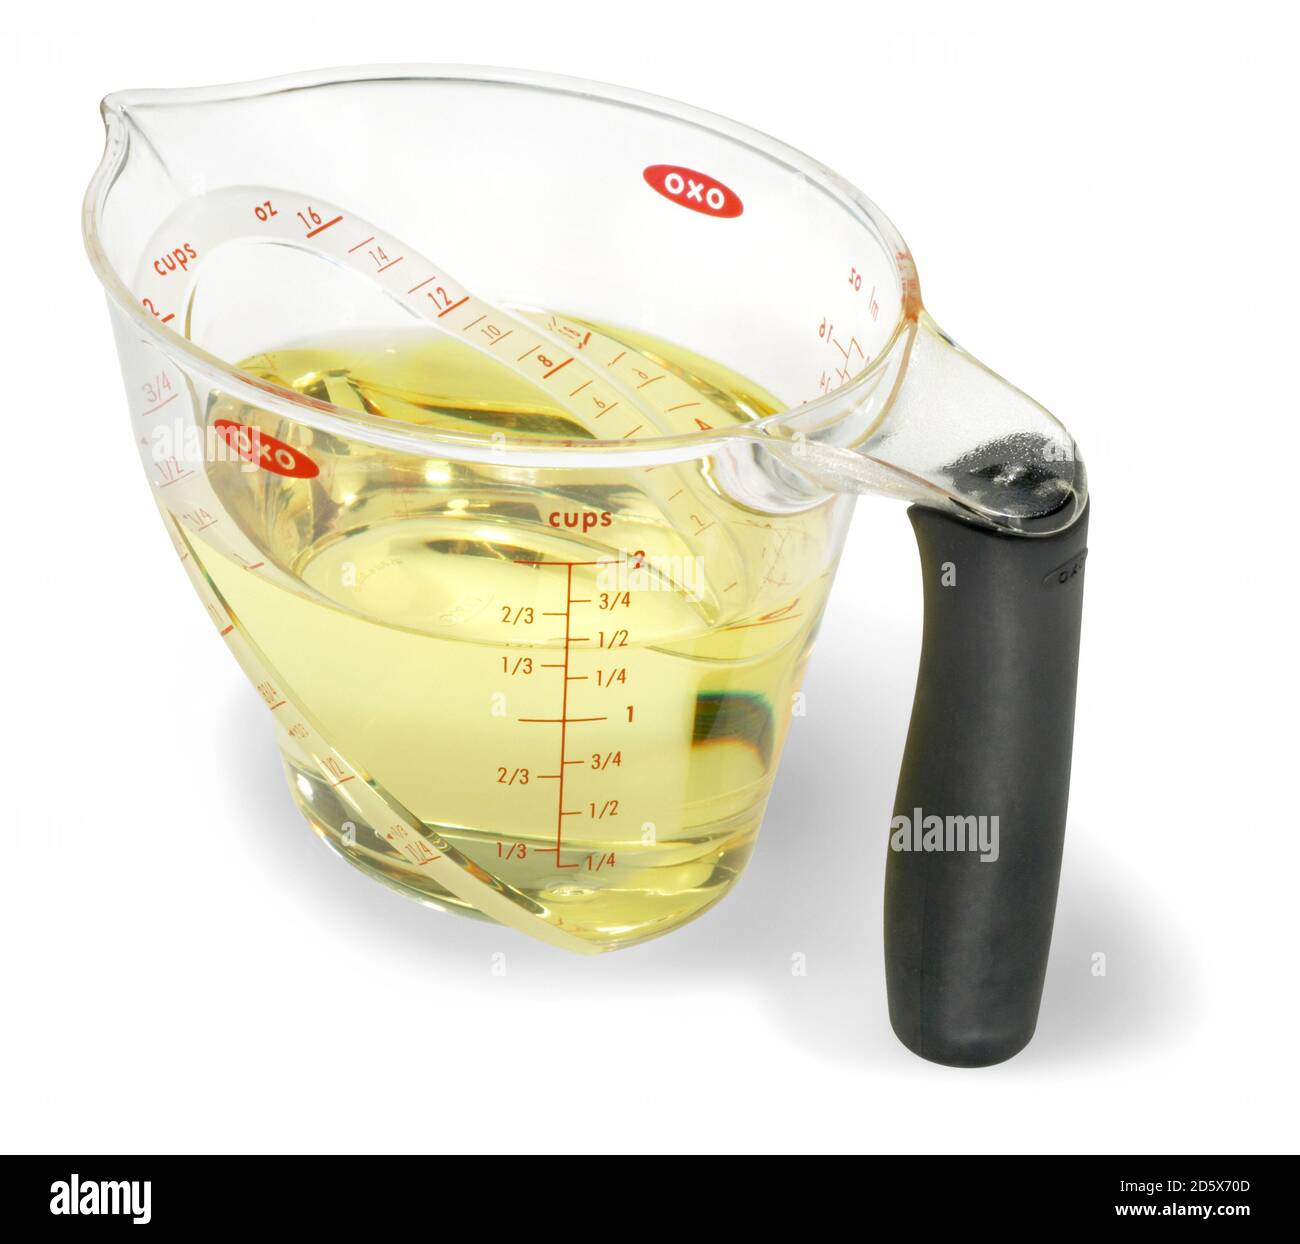 https://c8.alamy.com/comp/2D5X70D/oxo-brand-measuring-cup-filled-with-baking-oil-photographed-on-a-white-background-2D5X70D.jpg